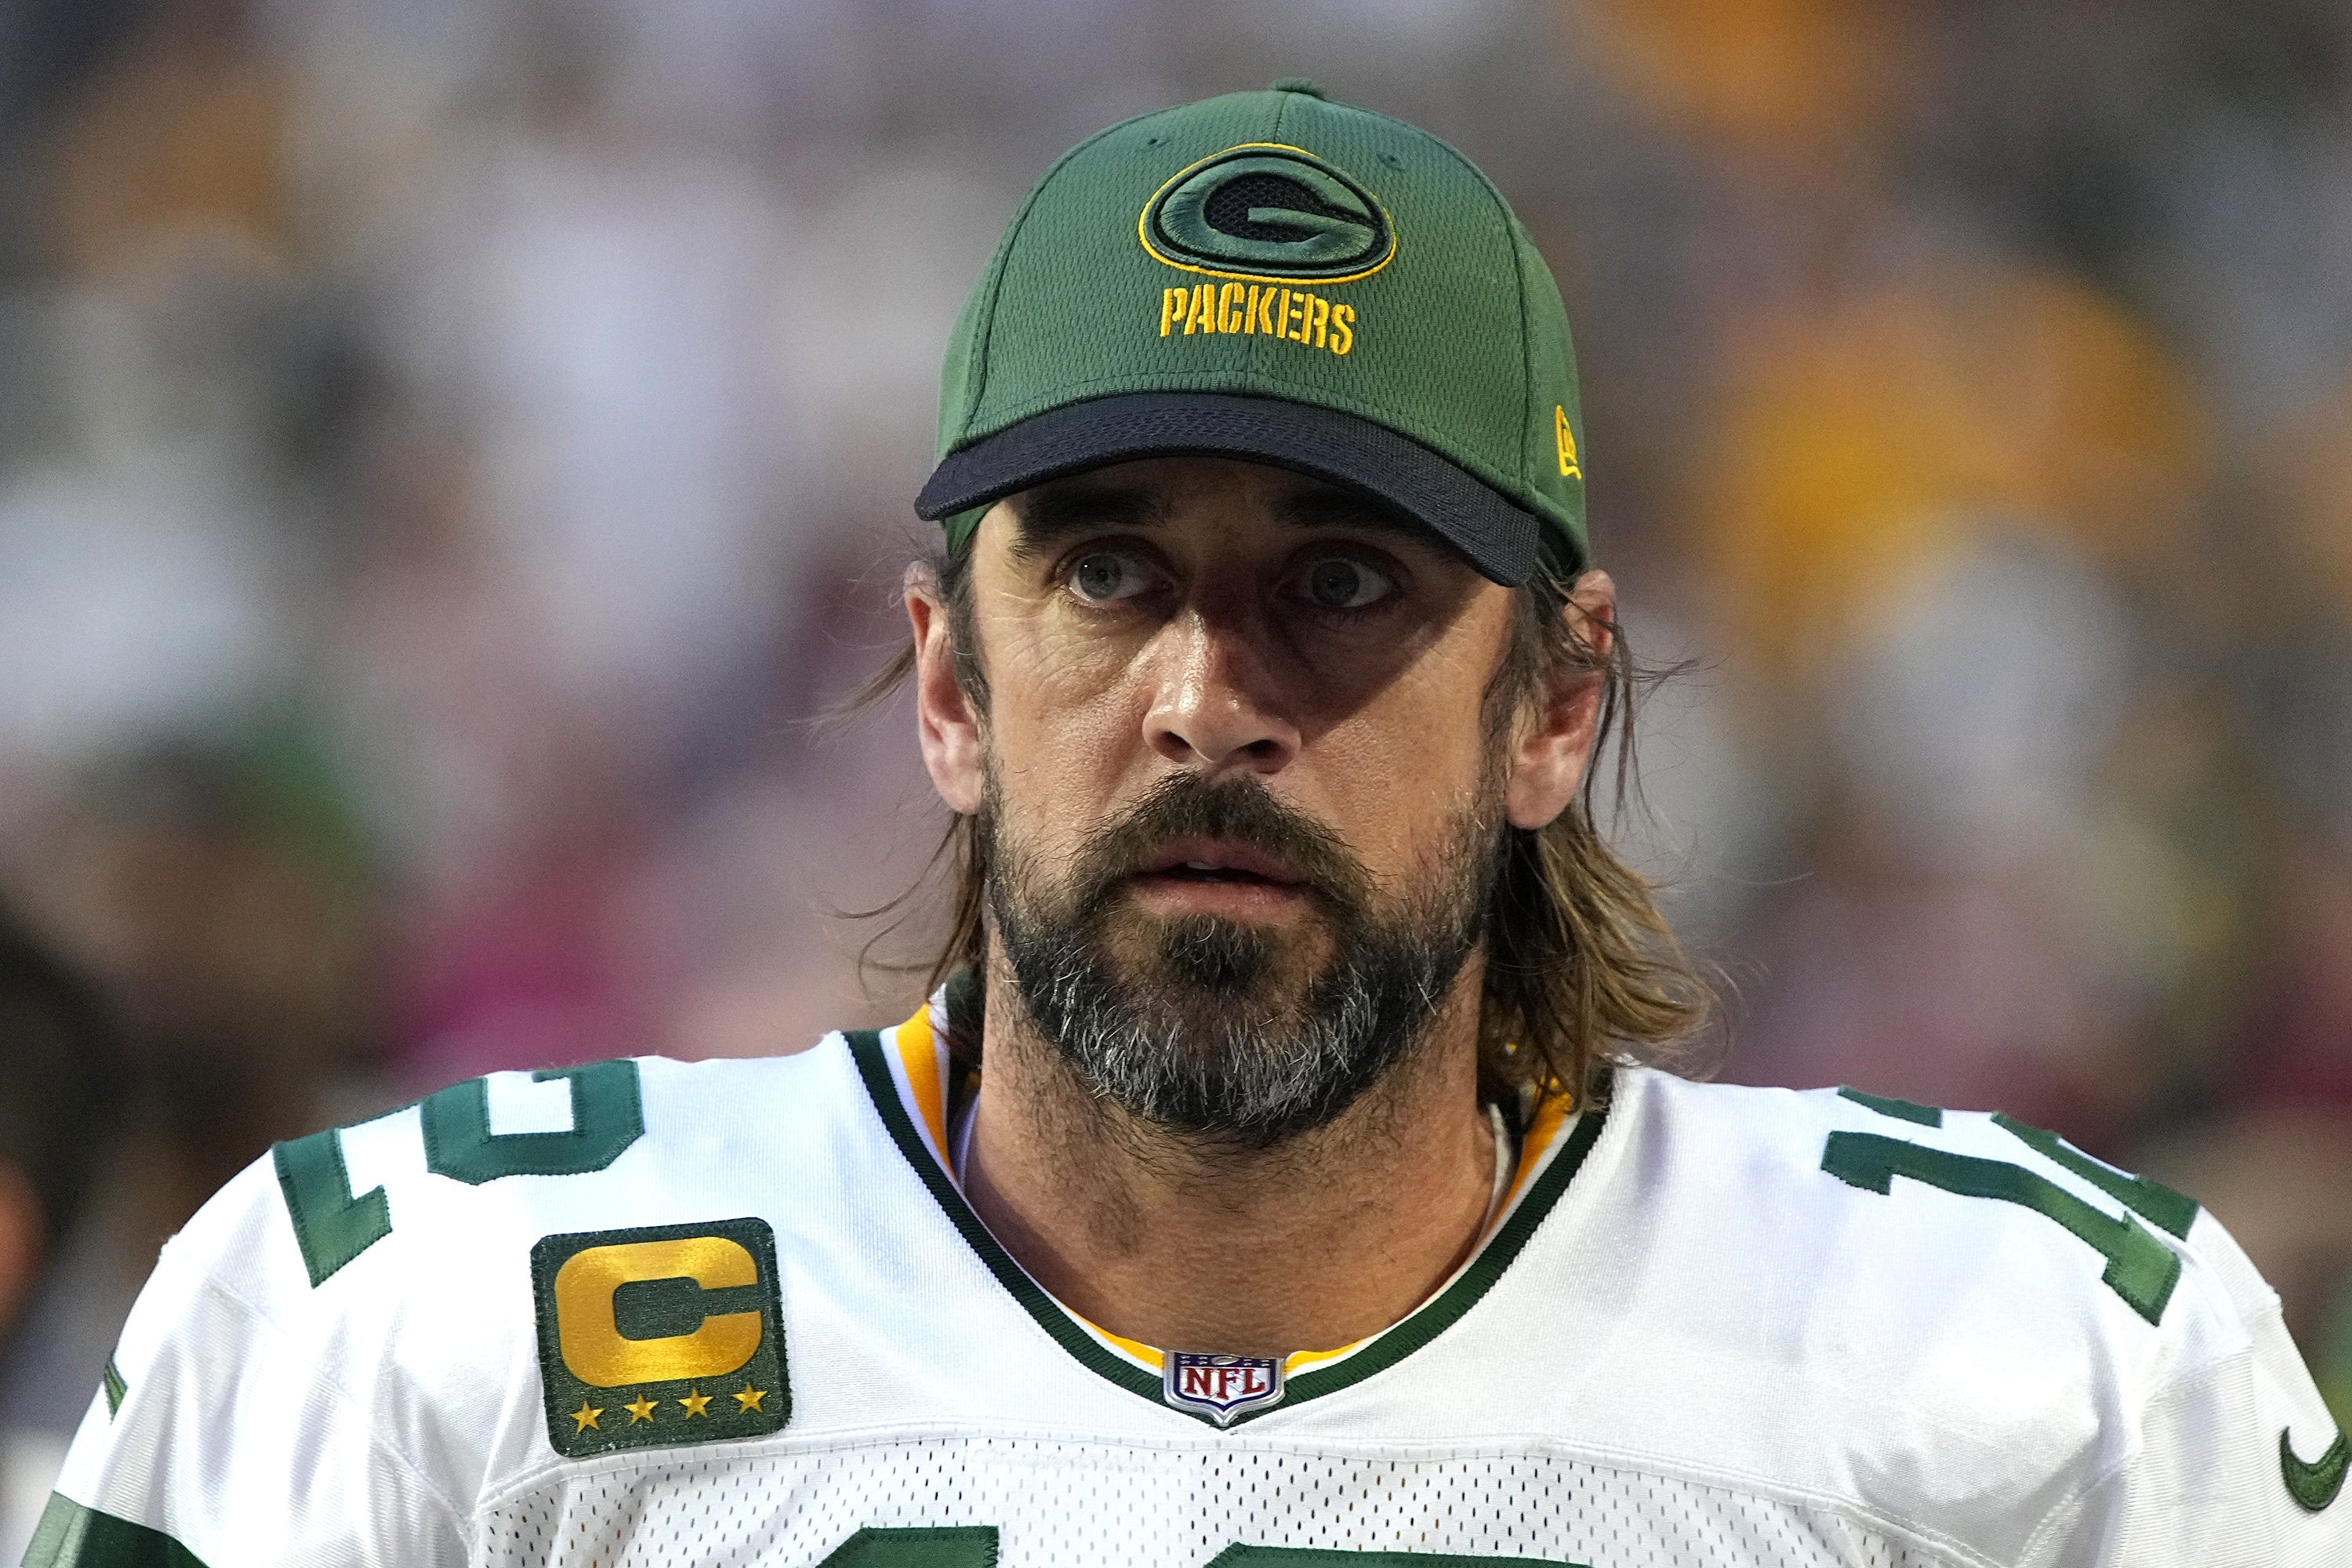 Packers' Aaron Rodgers activated, will play Sunday vs. Seahawks